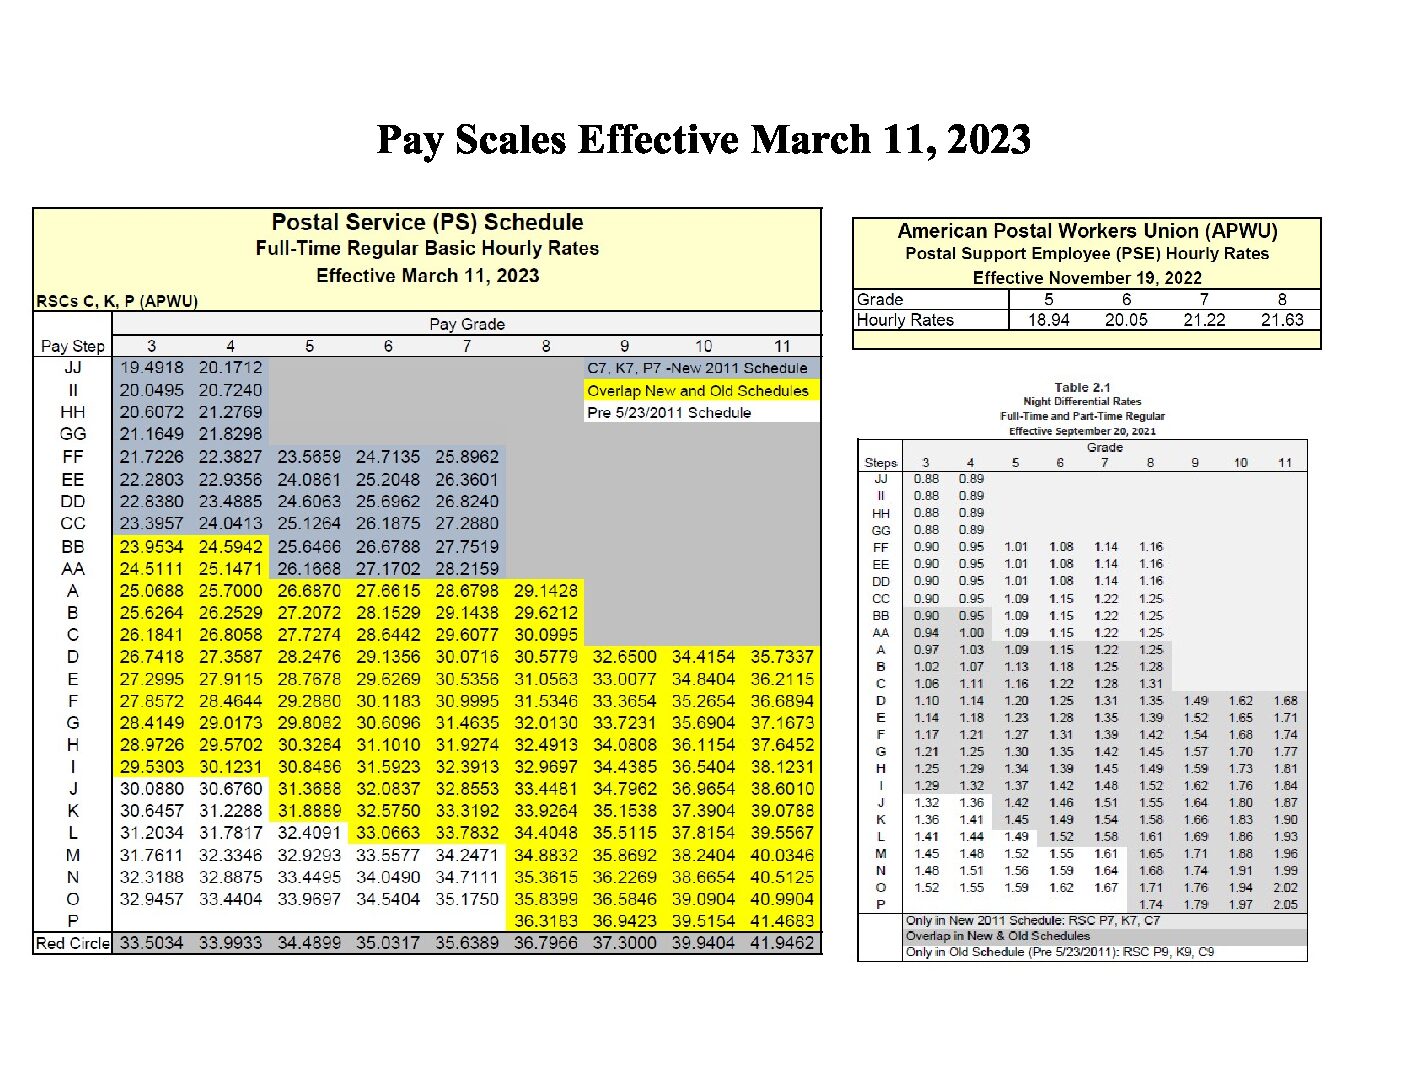 Postal Service Pay Scales Effective 3/11/2023 - 